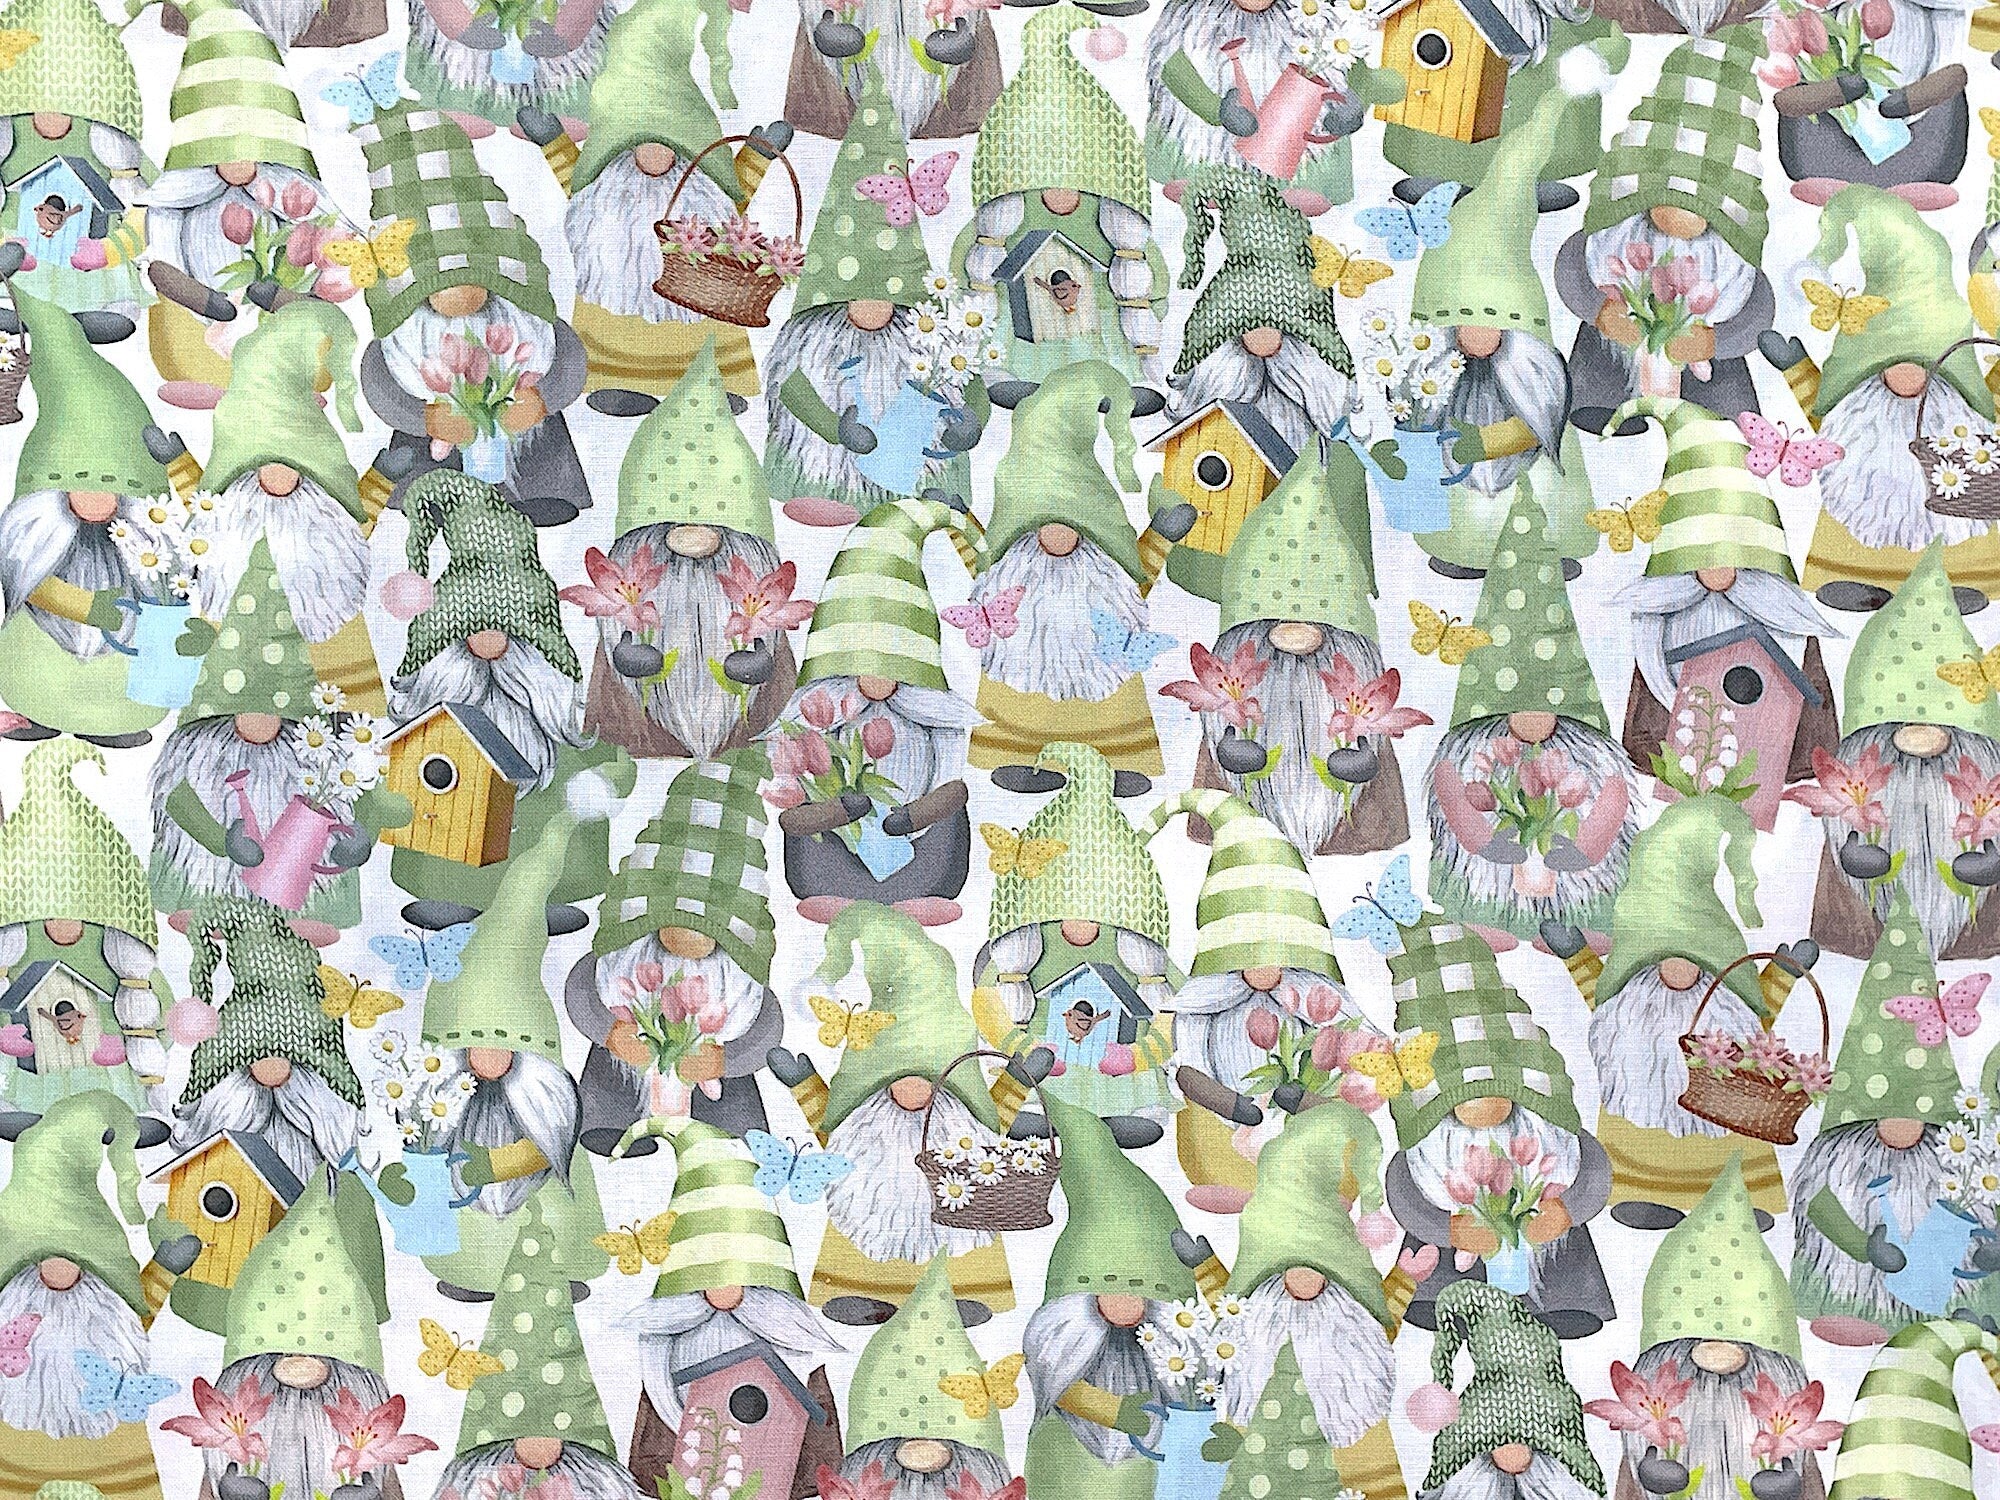 This cotton fabric is covered with gnomes, bird houses and flowers. The gnomes are holding bird houses, tulips and daisies.